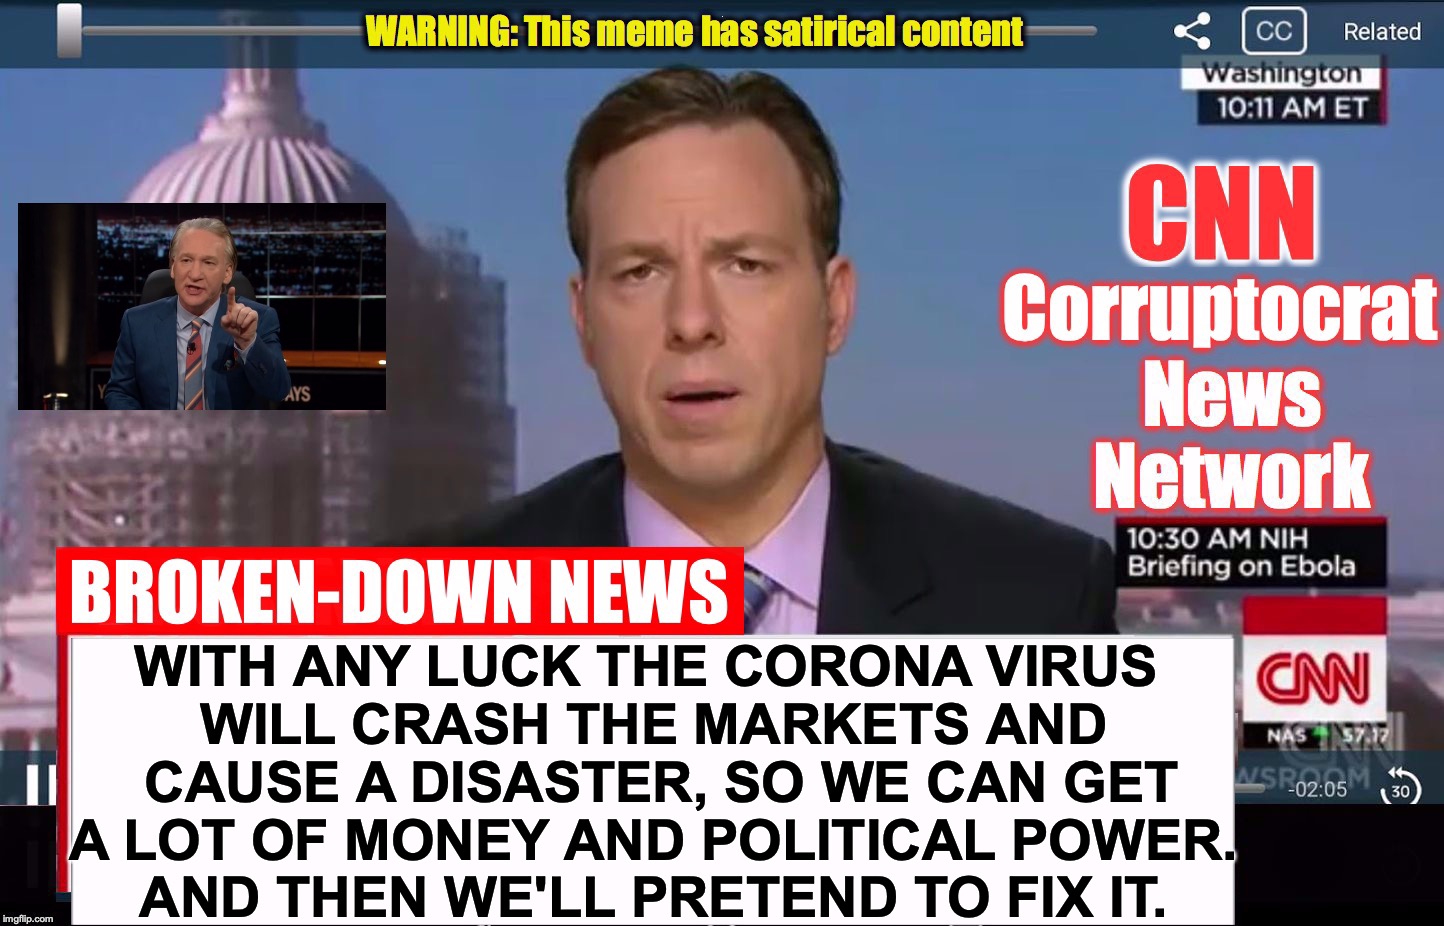 CNN Corruptocrat News Network | WITH ANY LUCK THE CORONA VIRUS 
WILL CRASH THE MARKETS AND
 CAUSE A DISASTER, SO WE CAN GET
 A LOT OF MONEY AND POLITICAL POWER. 
AND THEN WE'LL PRETEND TO FIX IT. | image tagged in cnn corruptocrat news network | made w/ Imgflip meme maker